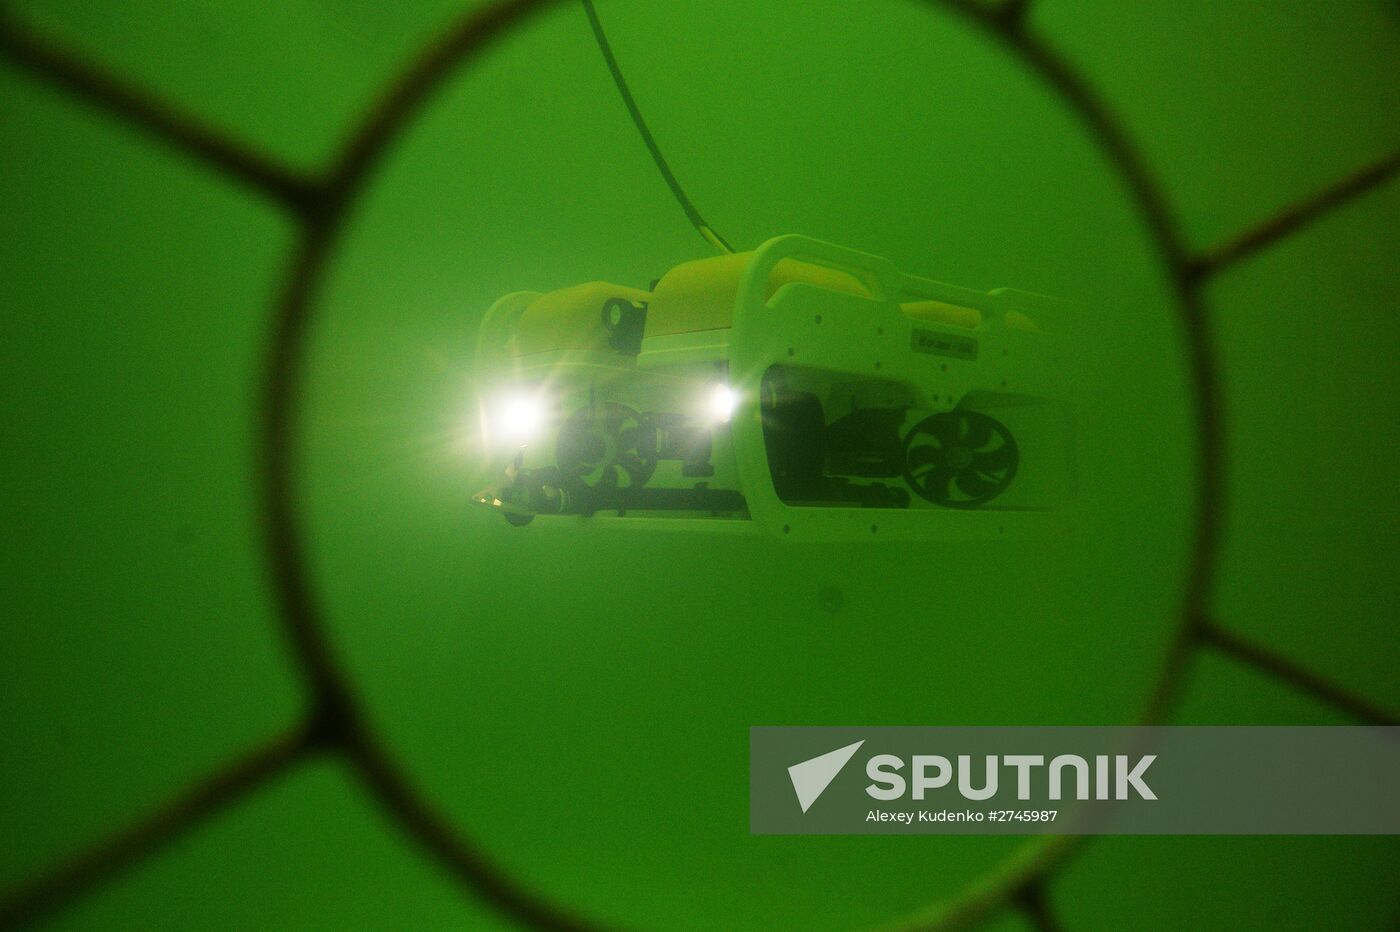 Marlin-350 remote controlled unmanned submersible is tested